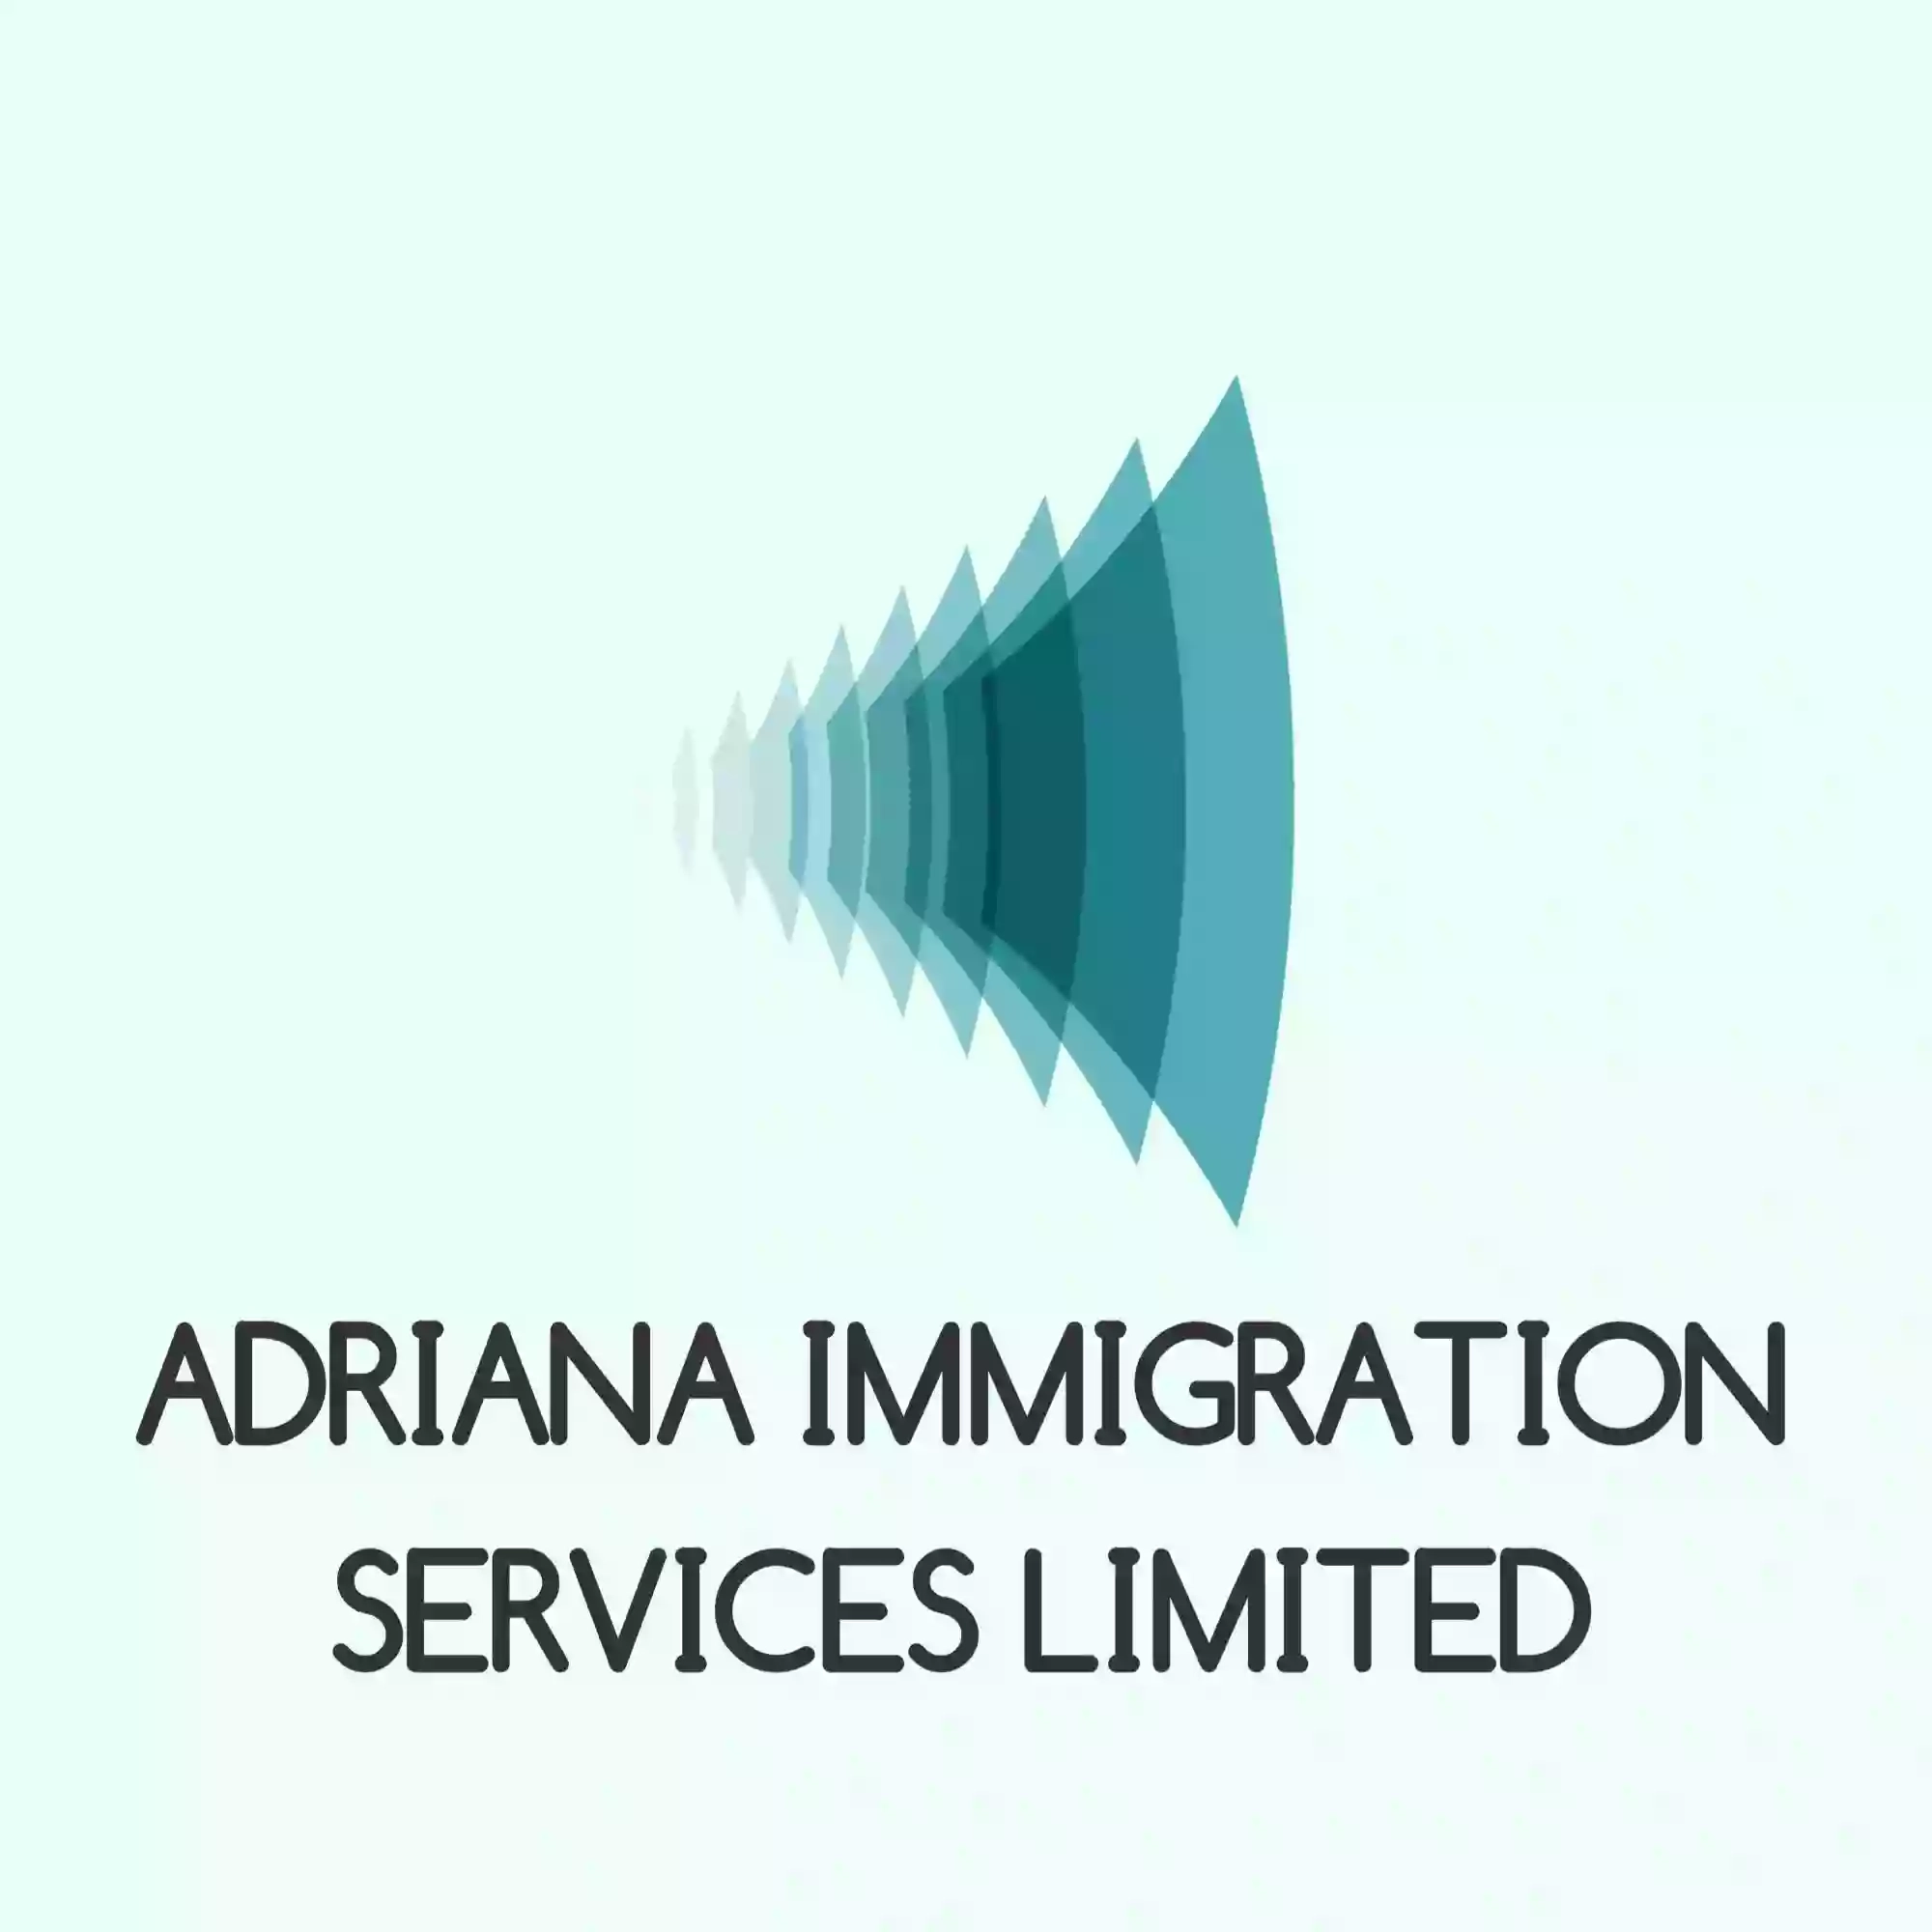 Adriana Immigration Services Limited